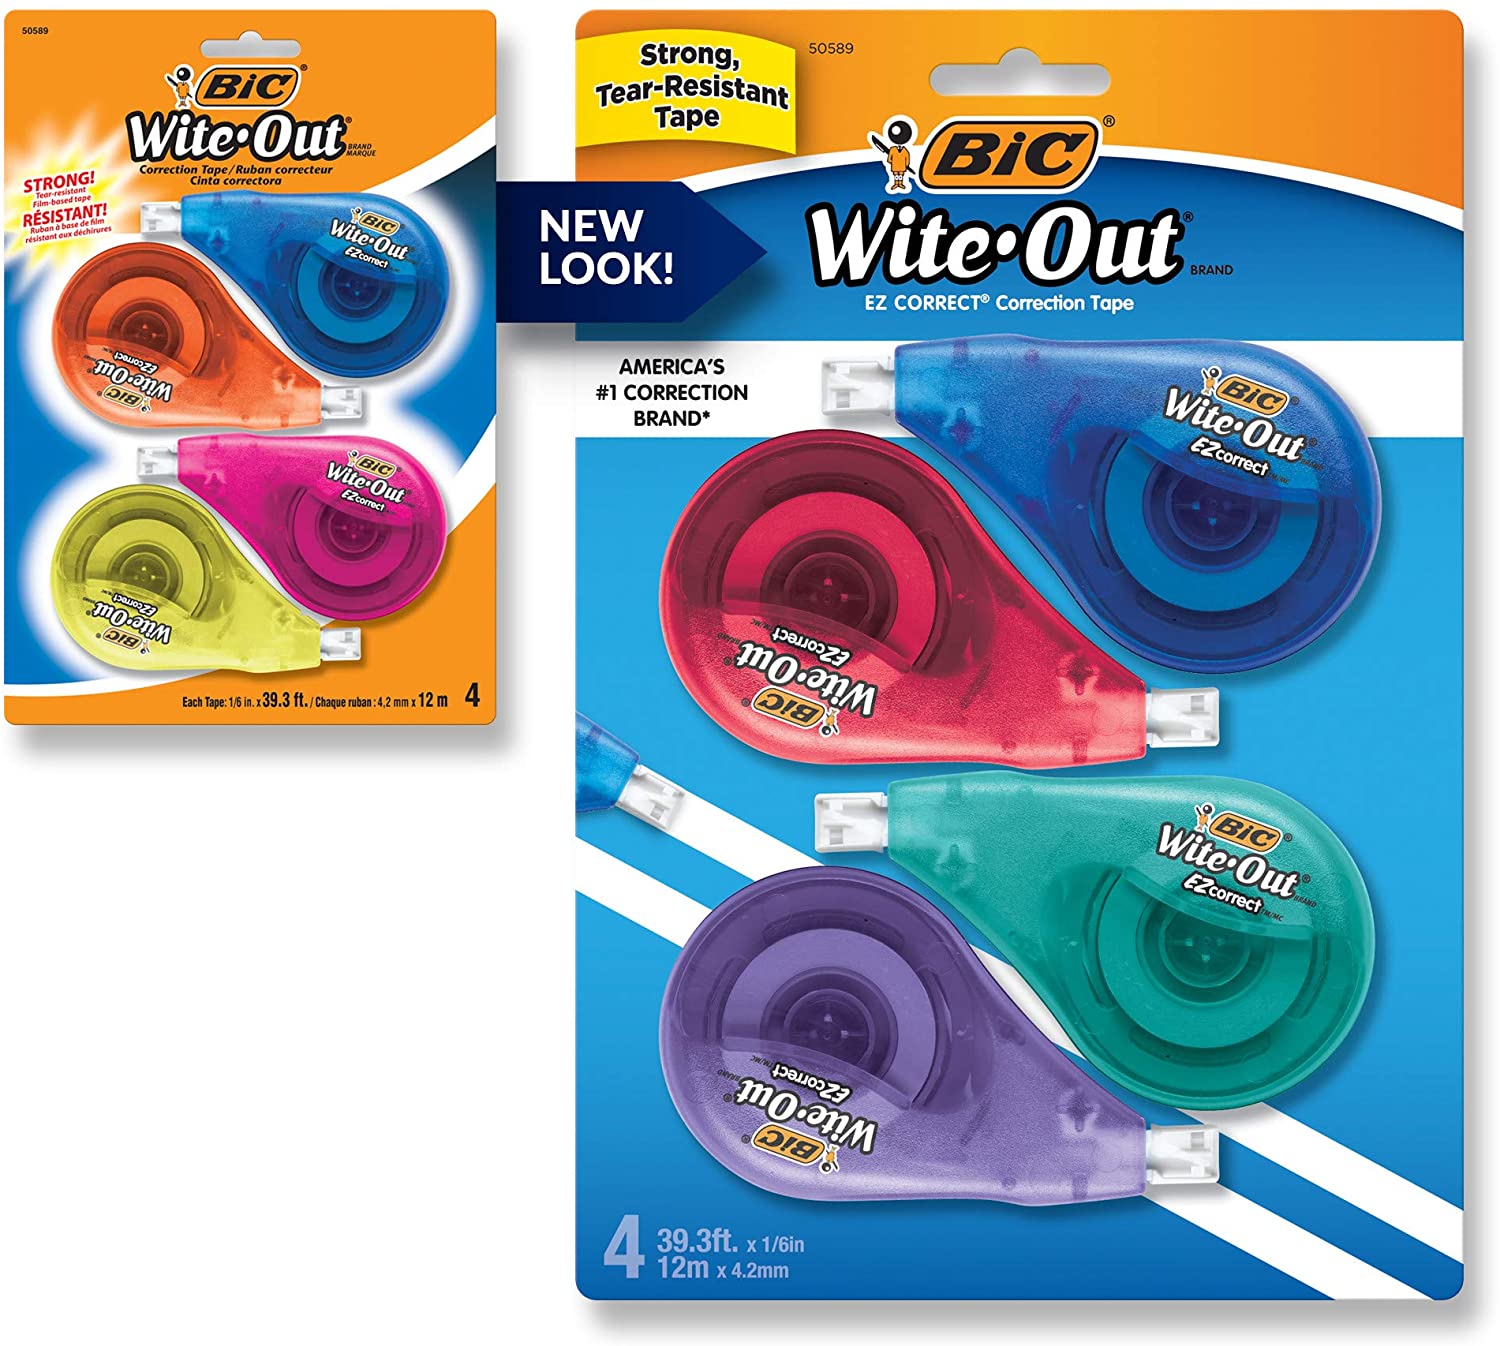 BIC AZDS1438 Out Brand EZ Correct Correction Tape - Applies Dry